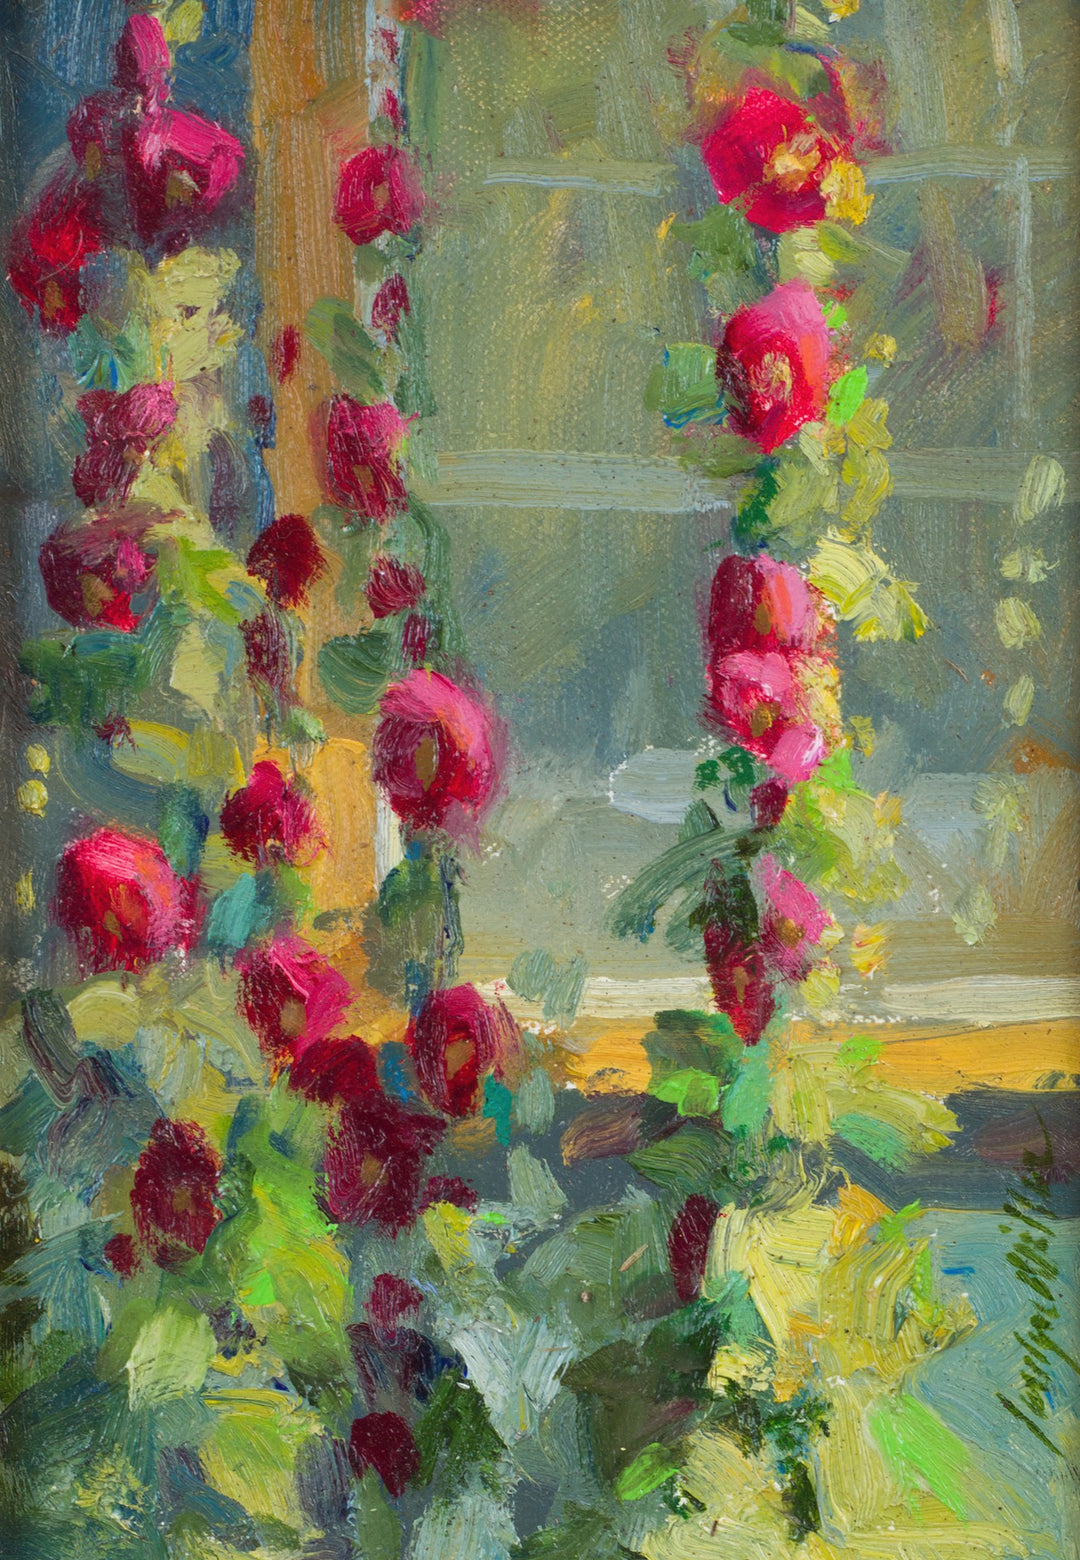 Hollyhocks I, 2006" by Carolyn Miller is an exquisite oil painting. This captivating artwork showcases vibrant red flowers elegantly arranged in front of a window. The expert use of oil on board brings out